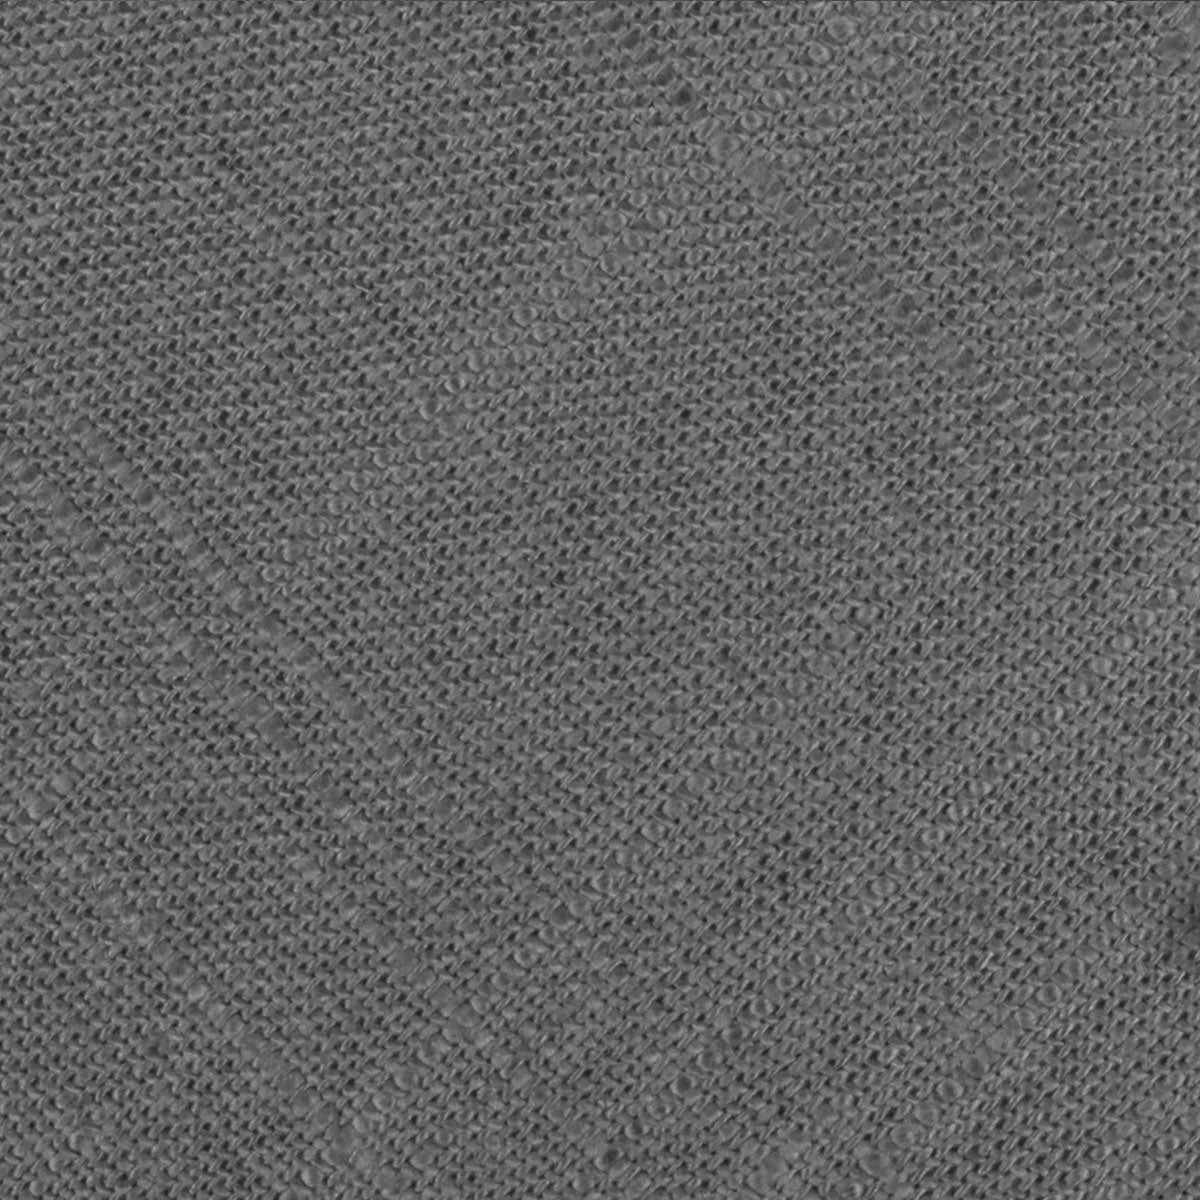 Pewter Grey Linen Fabric Swatch